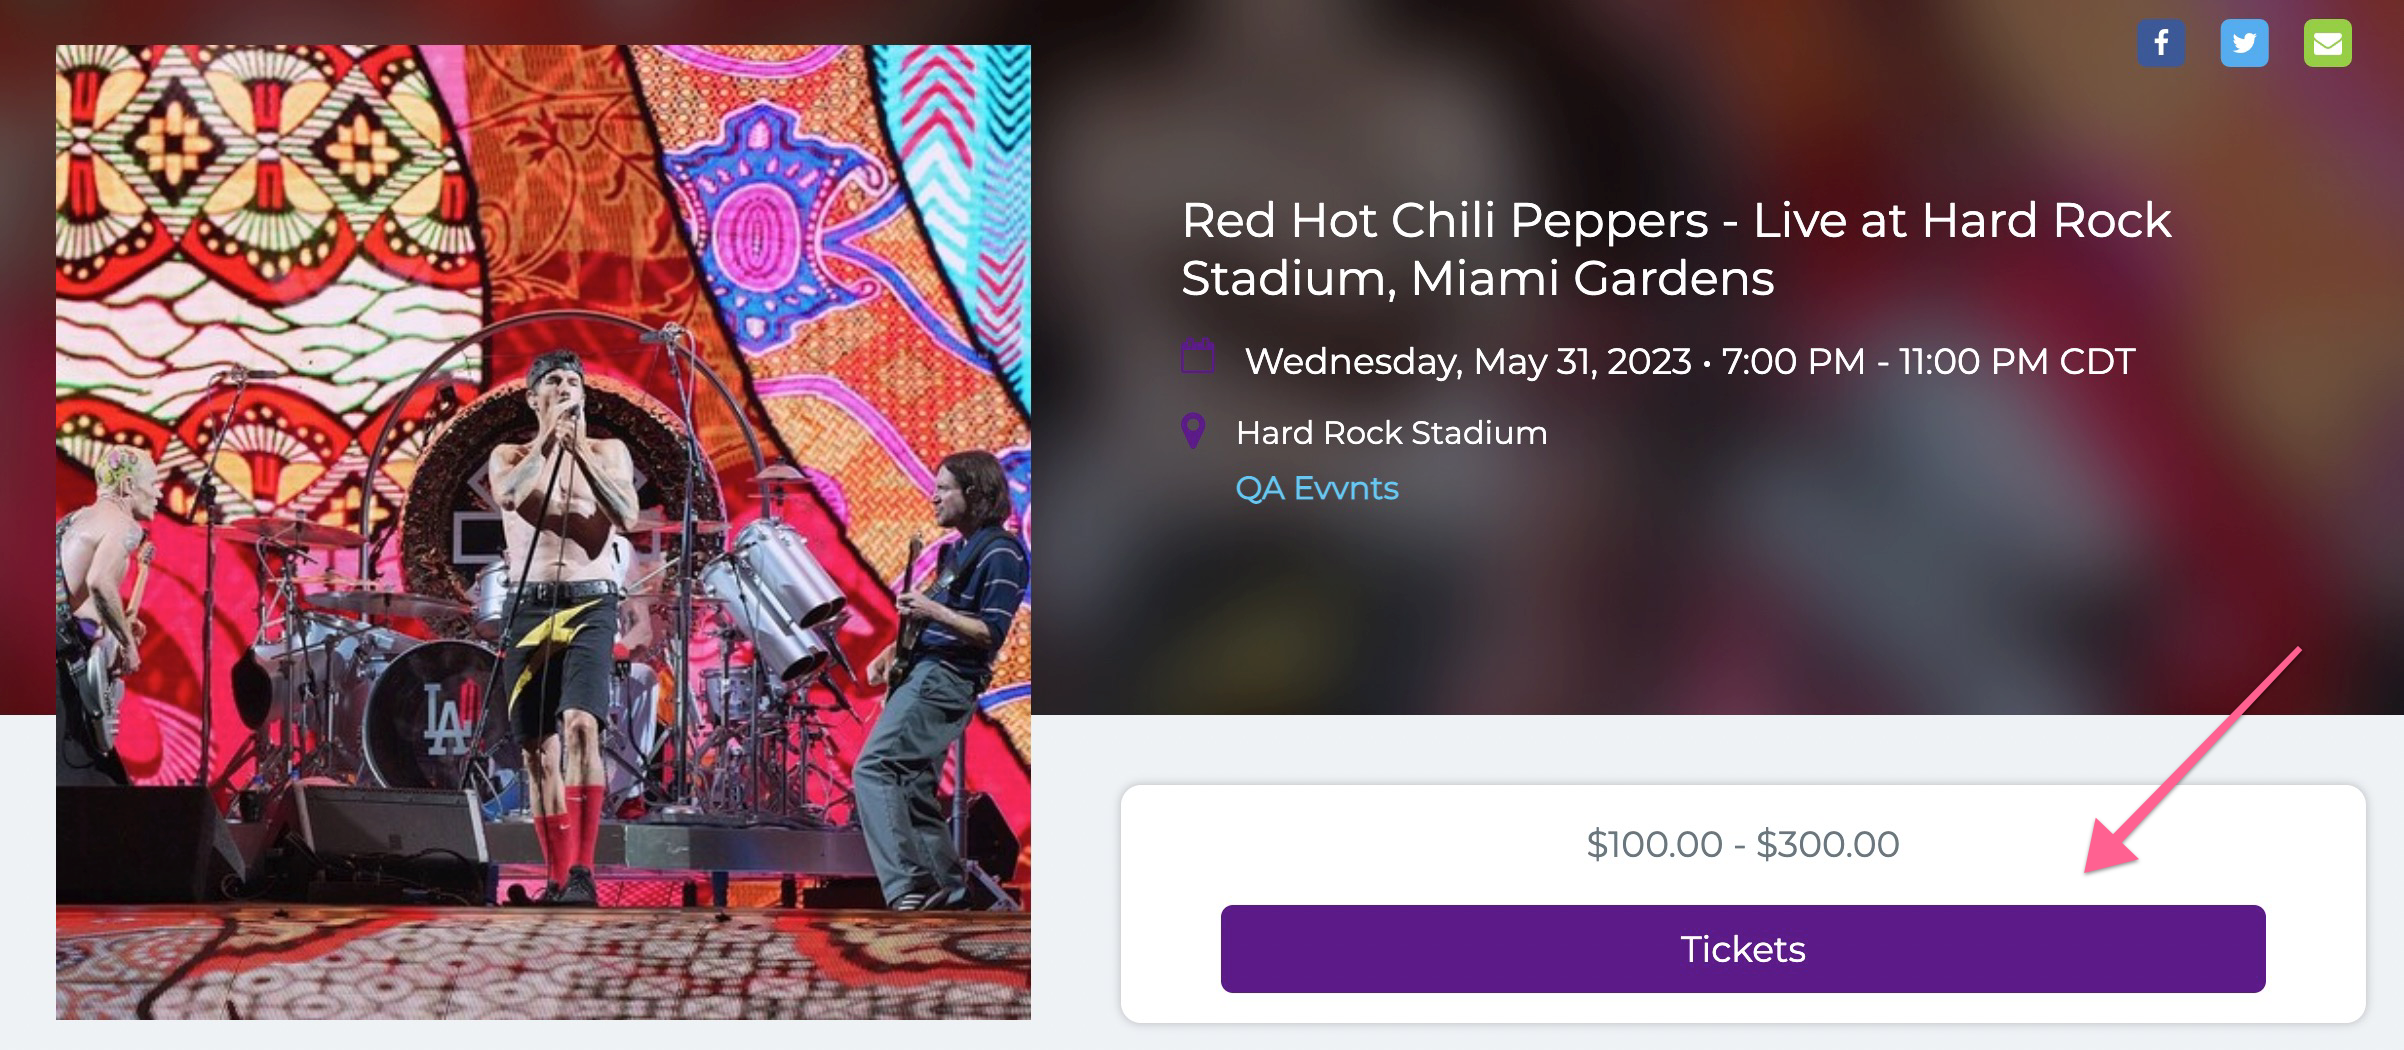 TCMI_Events_Red_Hot_Chili_Peppers_-_Live_at_Hard_Rock_Stadium__Miami_Gardens_2023-01-24_at_3.10.27_PM.jpg